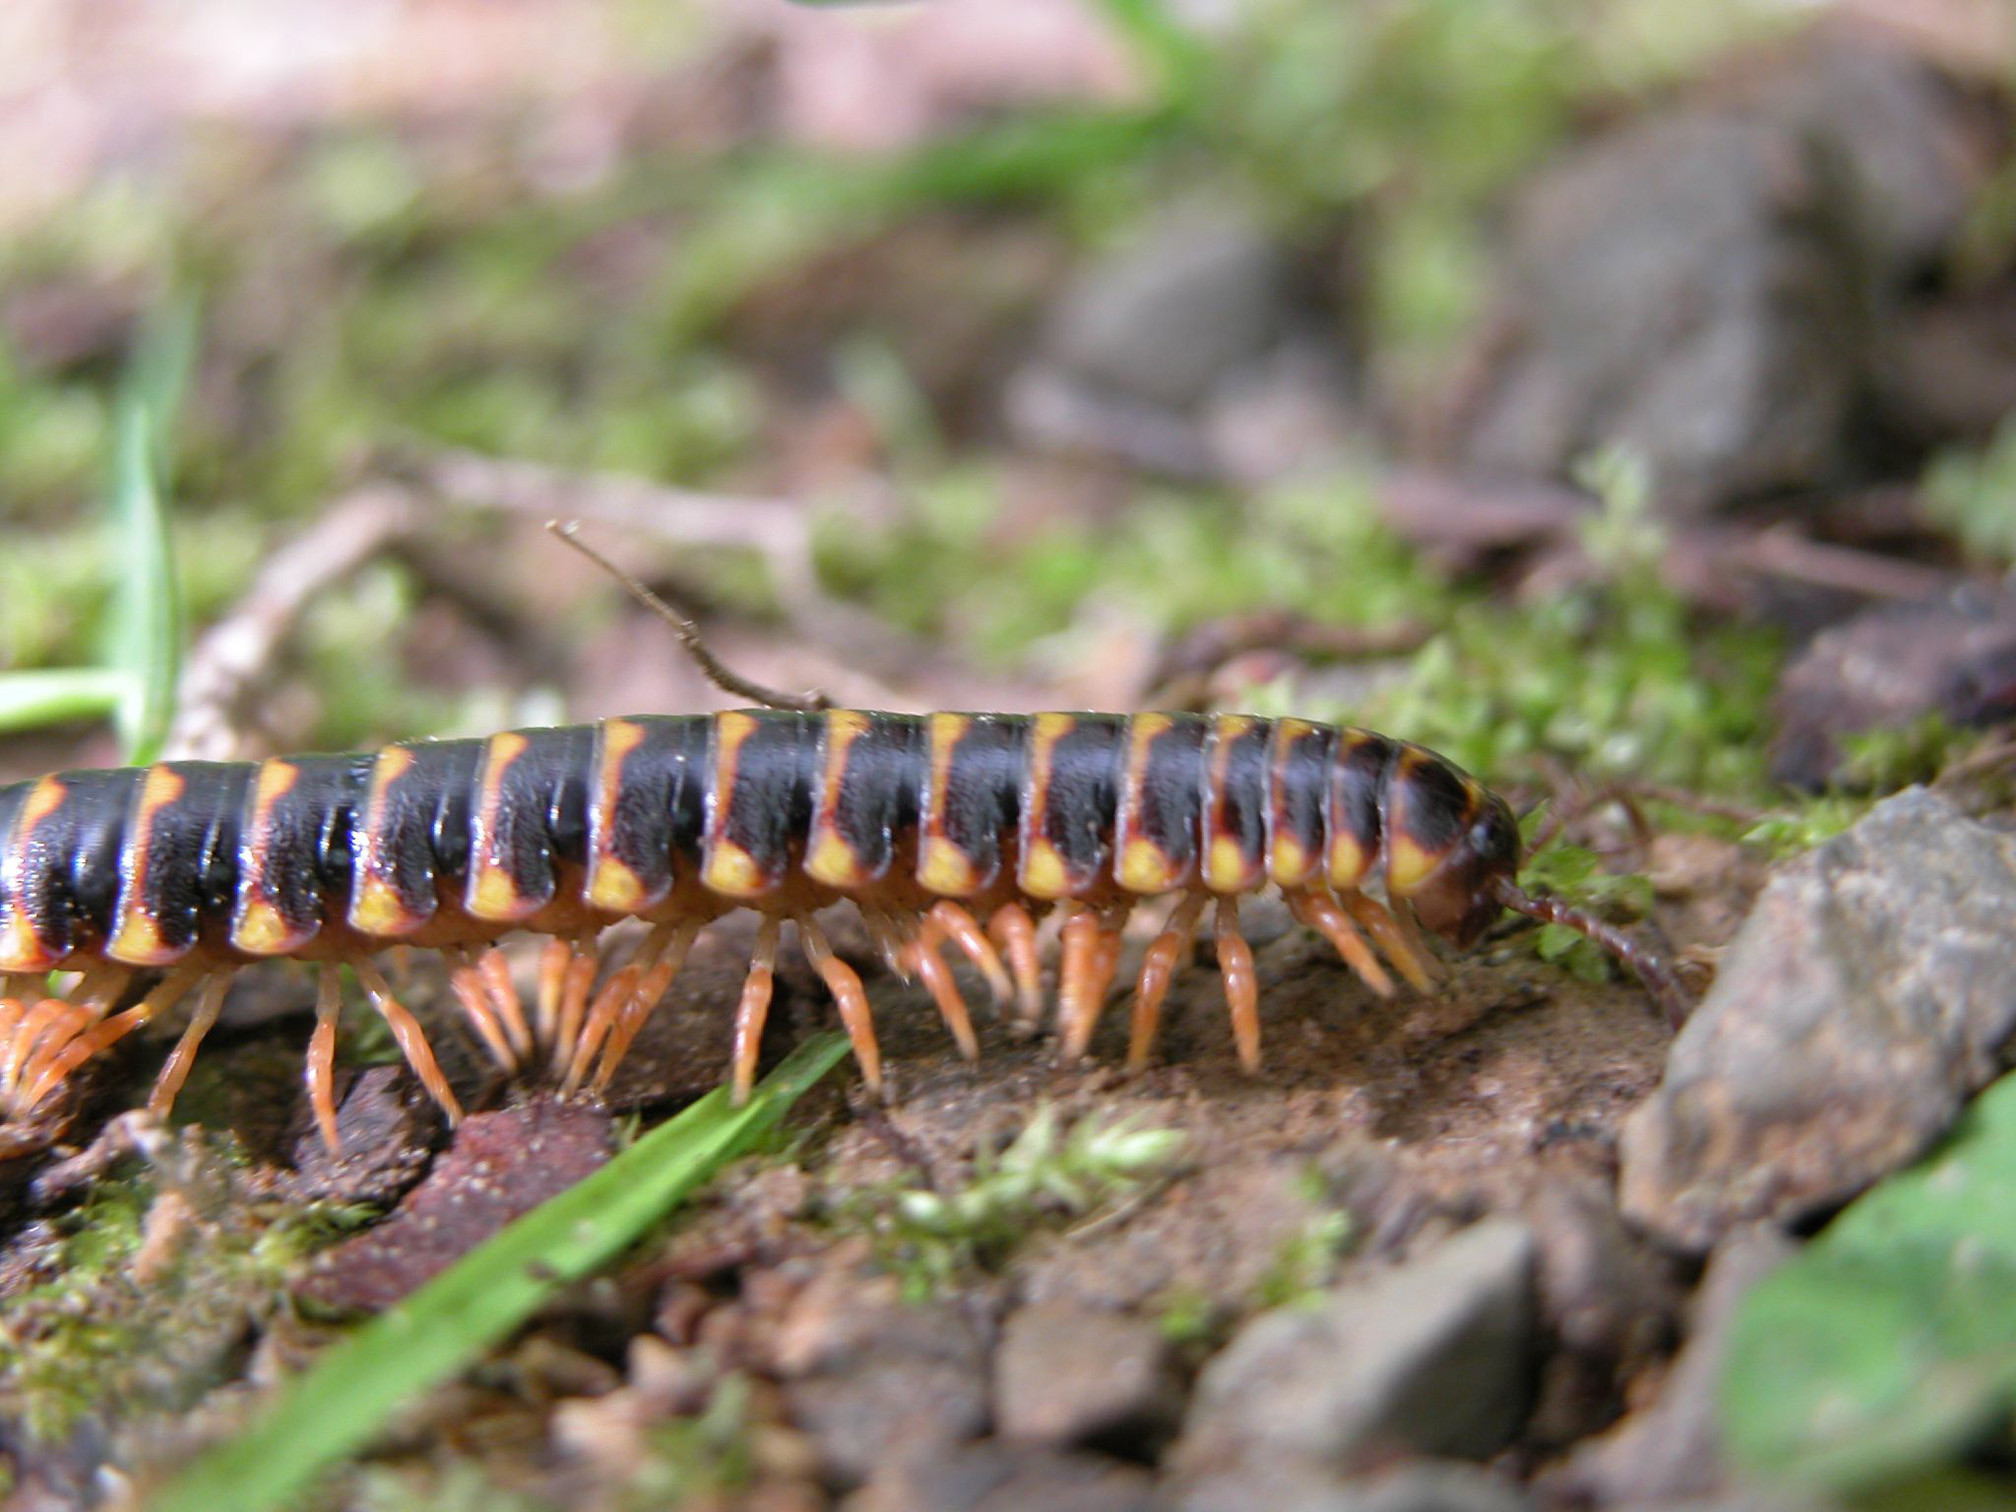 A close up photo of a millipede. The long body of the millipede stretches across the photo. Each body segment is black, with yellow along the rear edge, and has two pairs of legs. The legs can be seen to lift in sequence as the millipede walks toward the right.